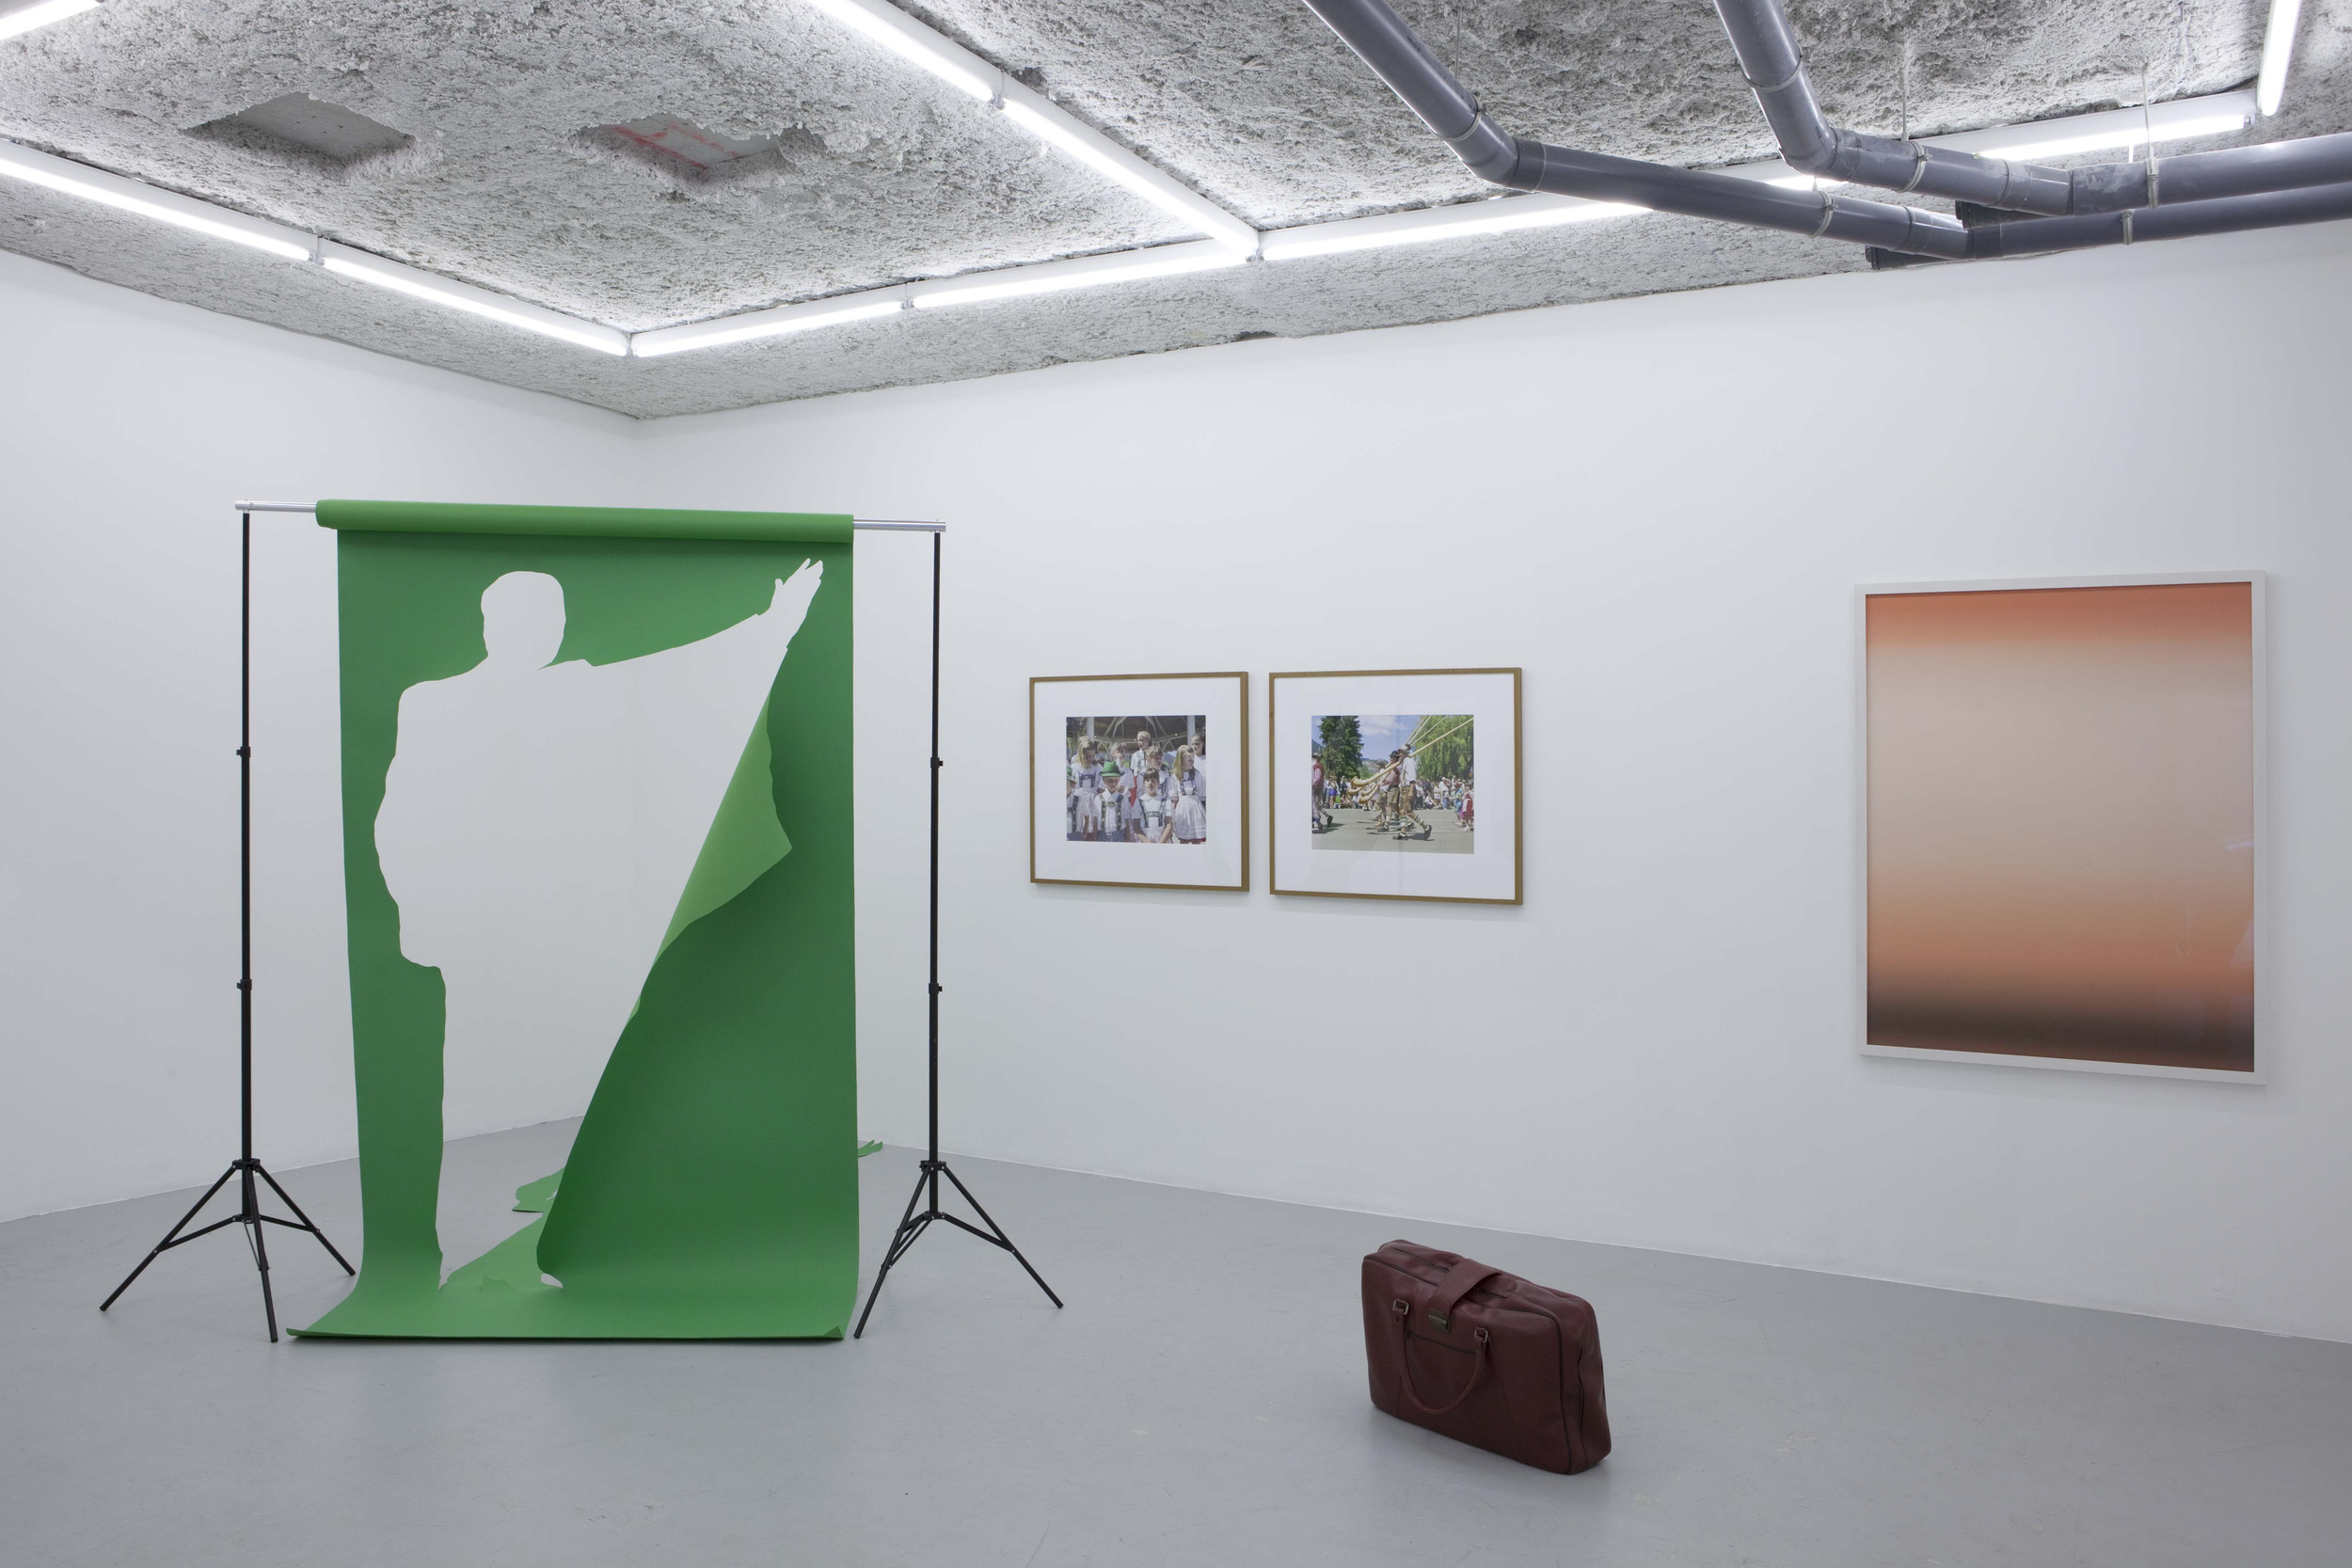 Green Screen in Before and After at Balice Hertling, Paris, 2010.jpg